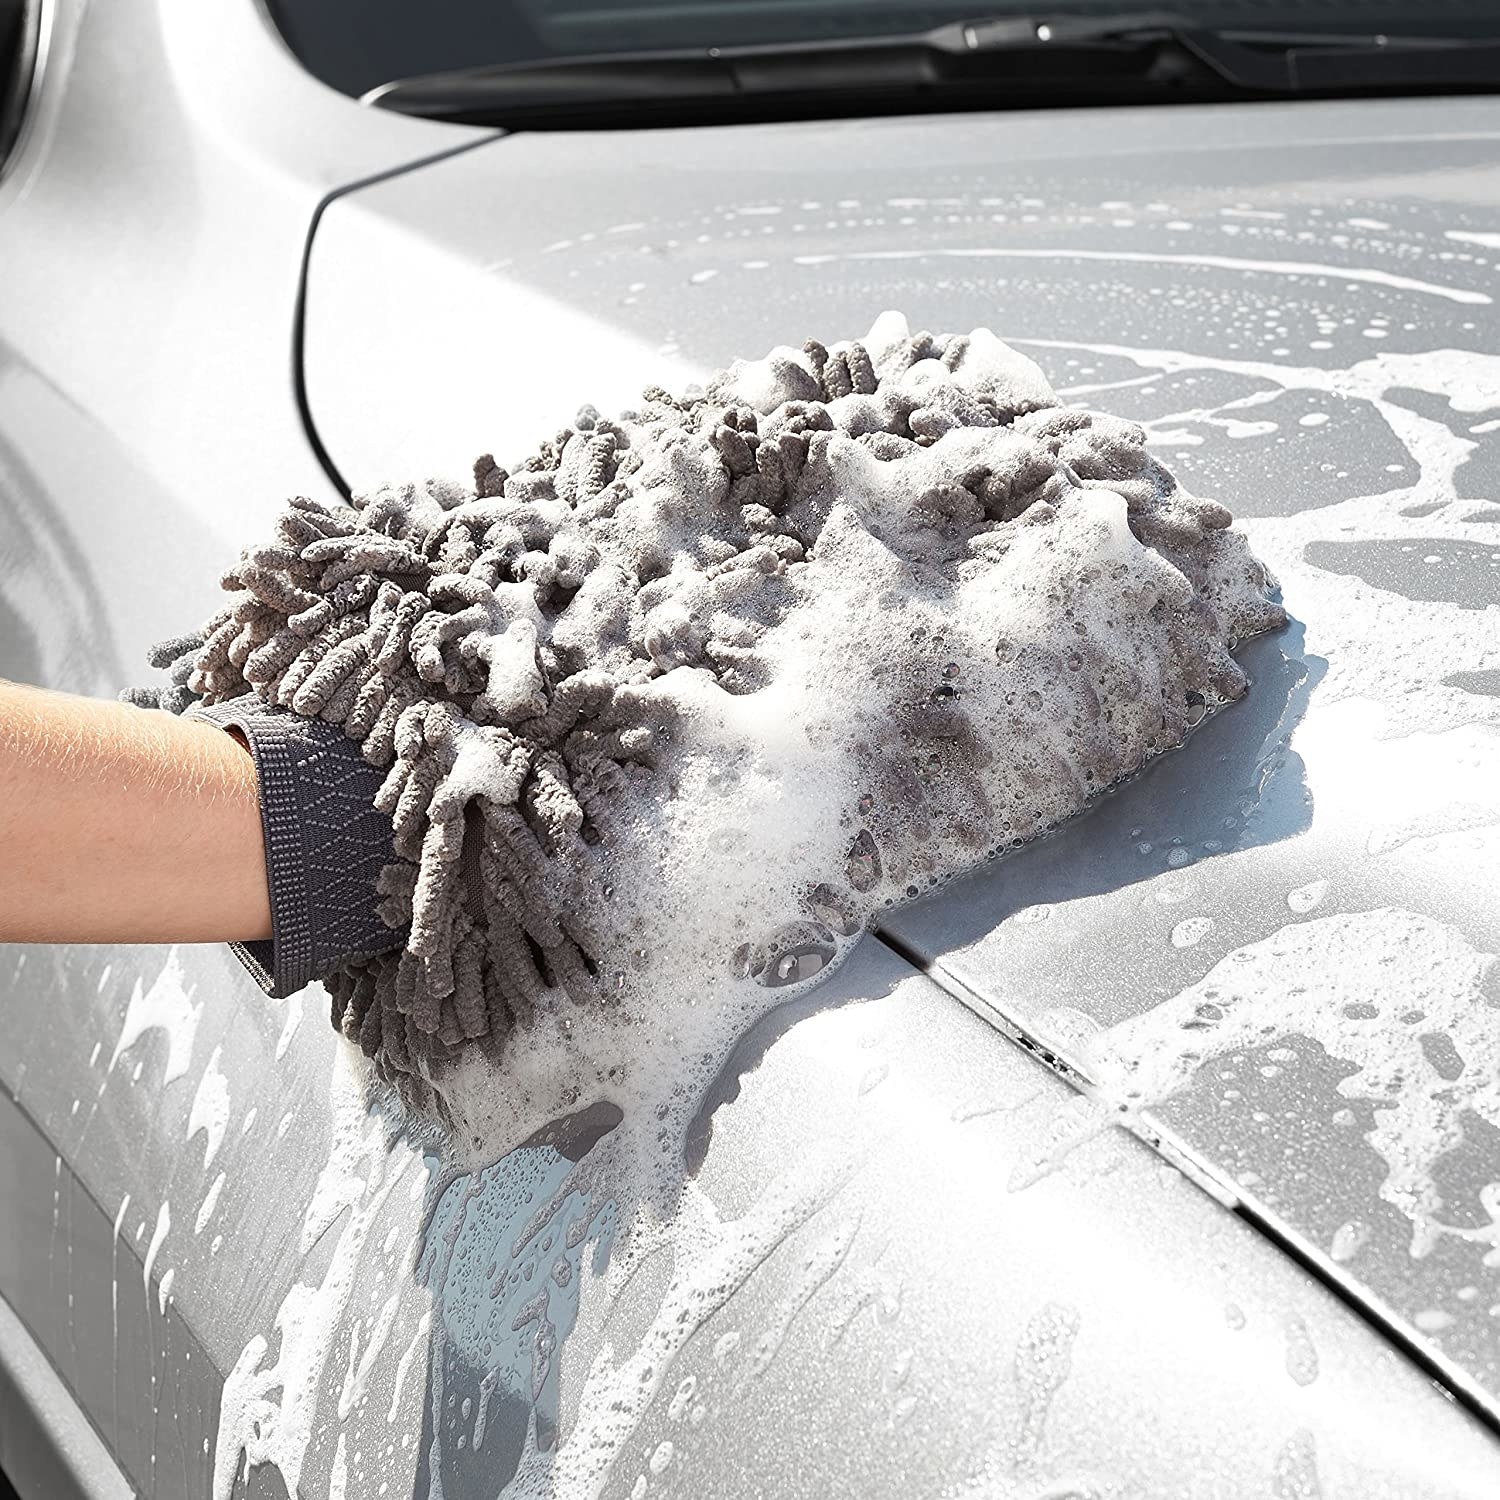 A person scrubbing the hood of their car with the washing mitt